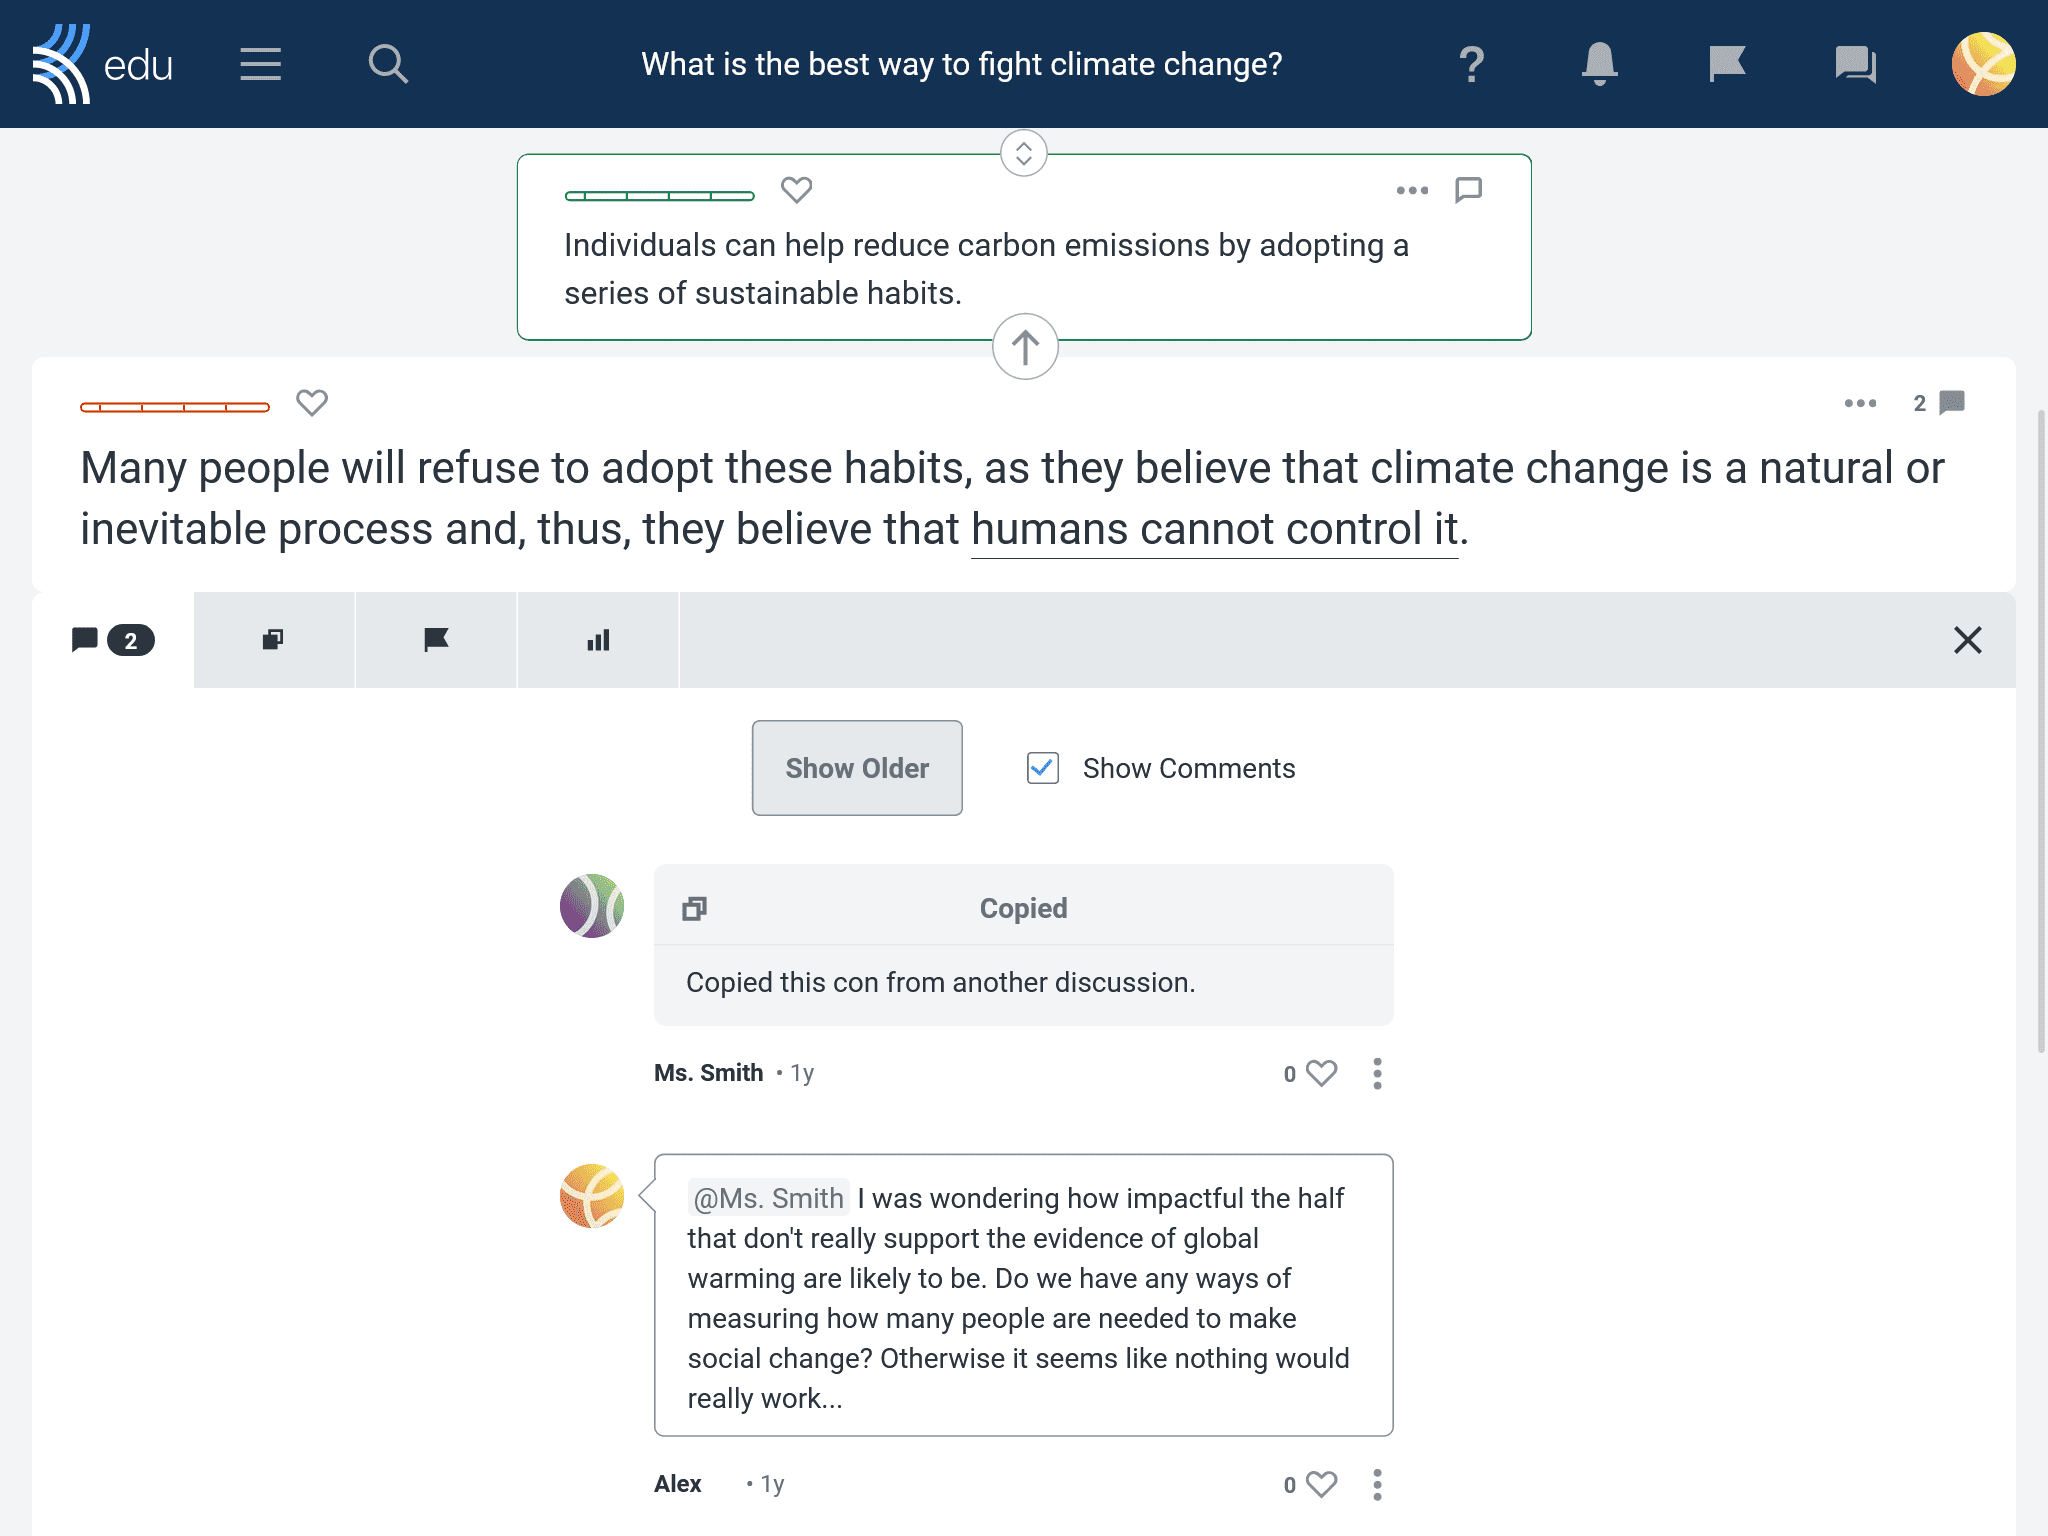 A discussion review as a cognitive learning strategy, where a student comments on a claim to question how impactful one part of the claim is. 